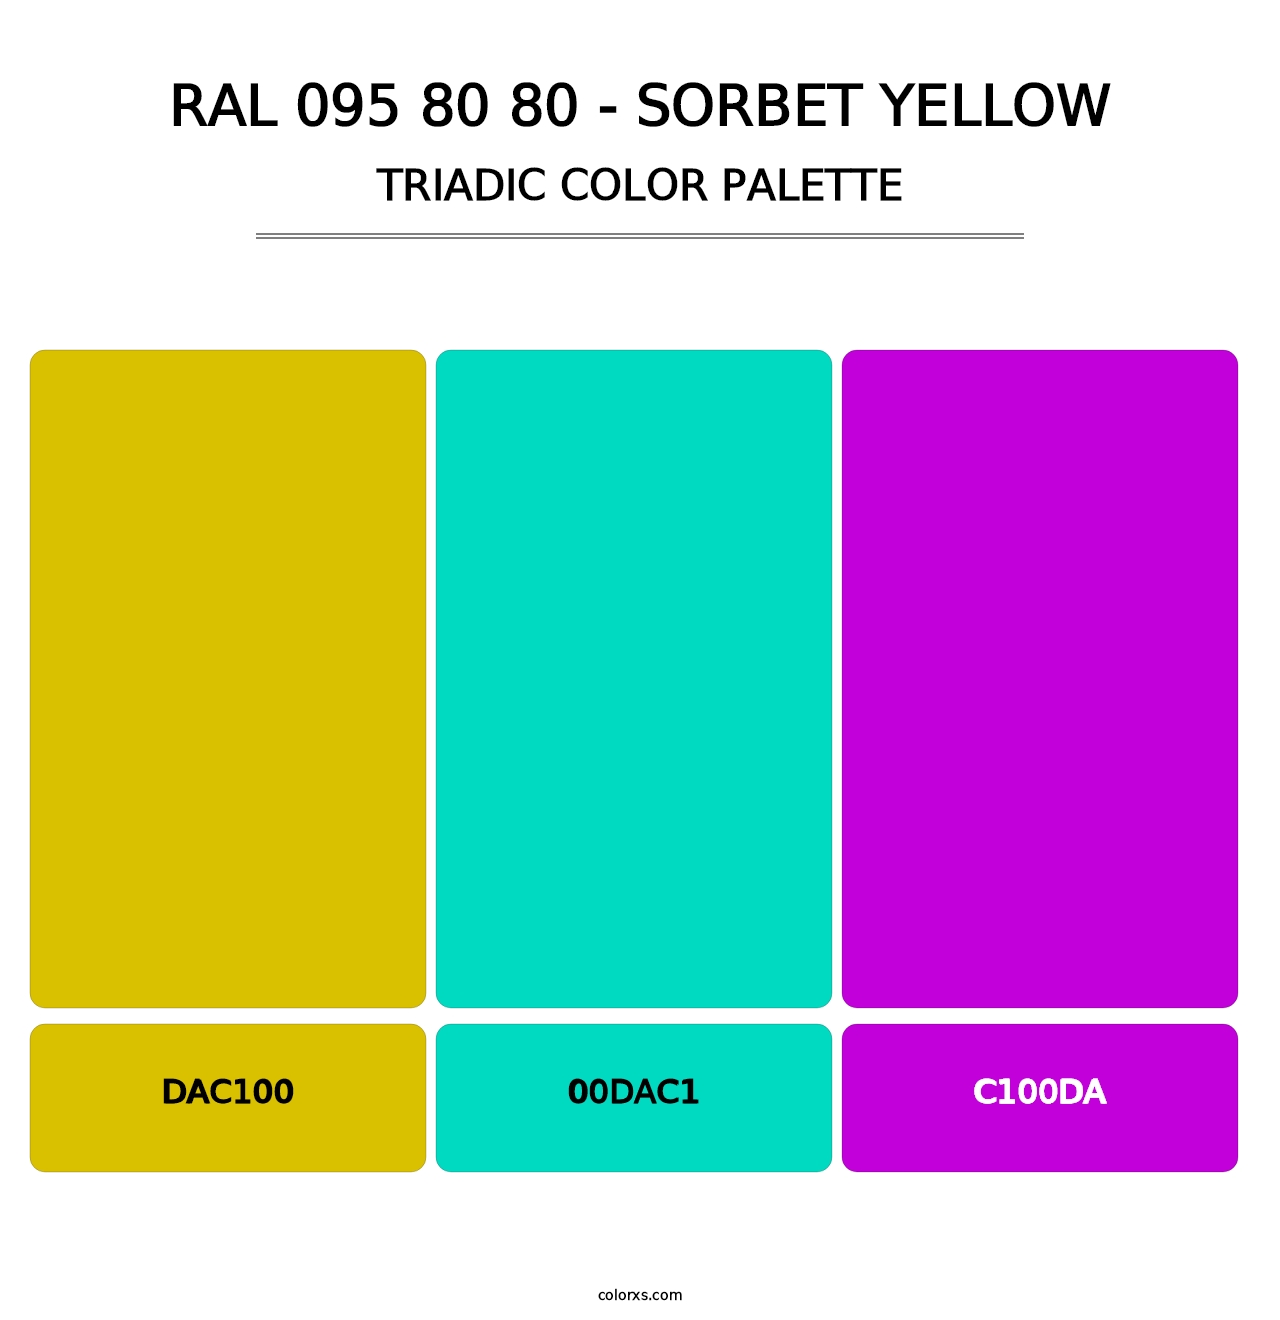 RAL 095 80 80 - Sorbet Yellow - Triadic Color Palette